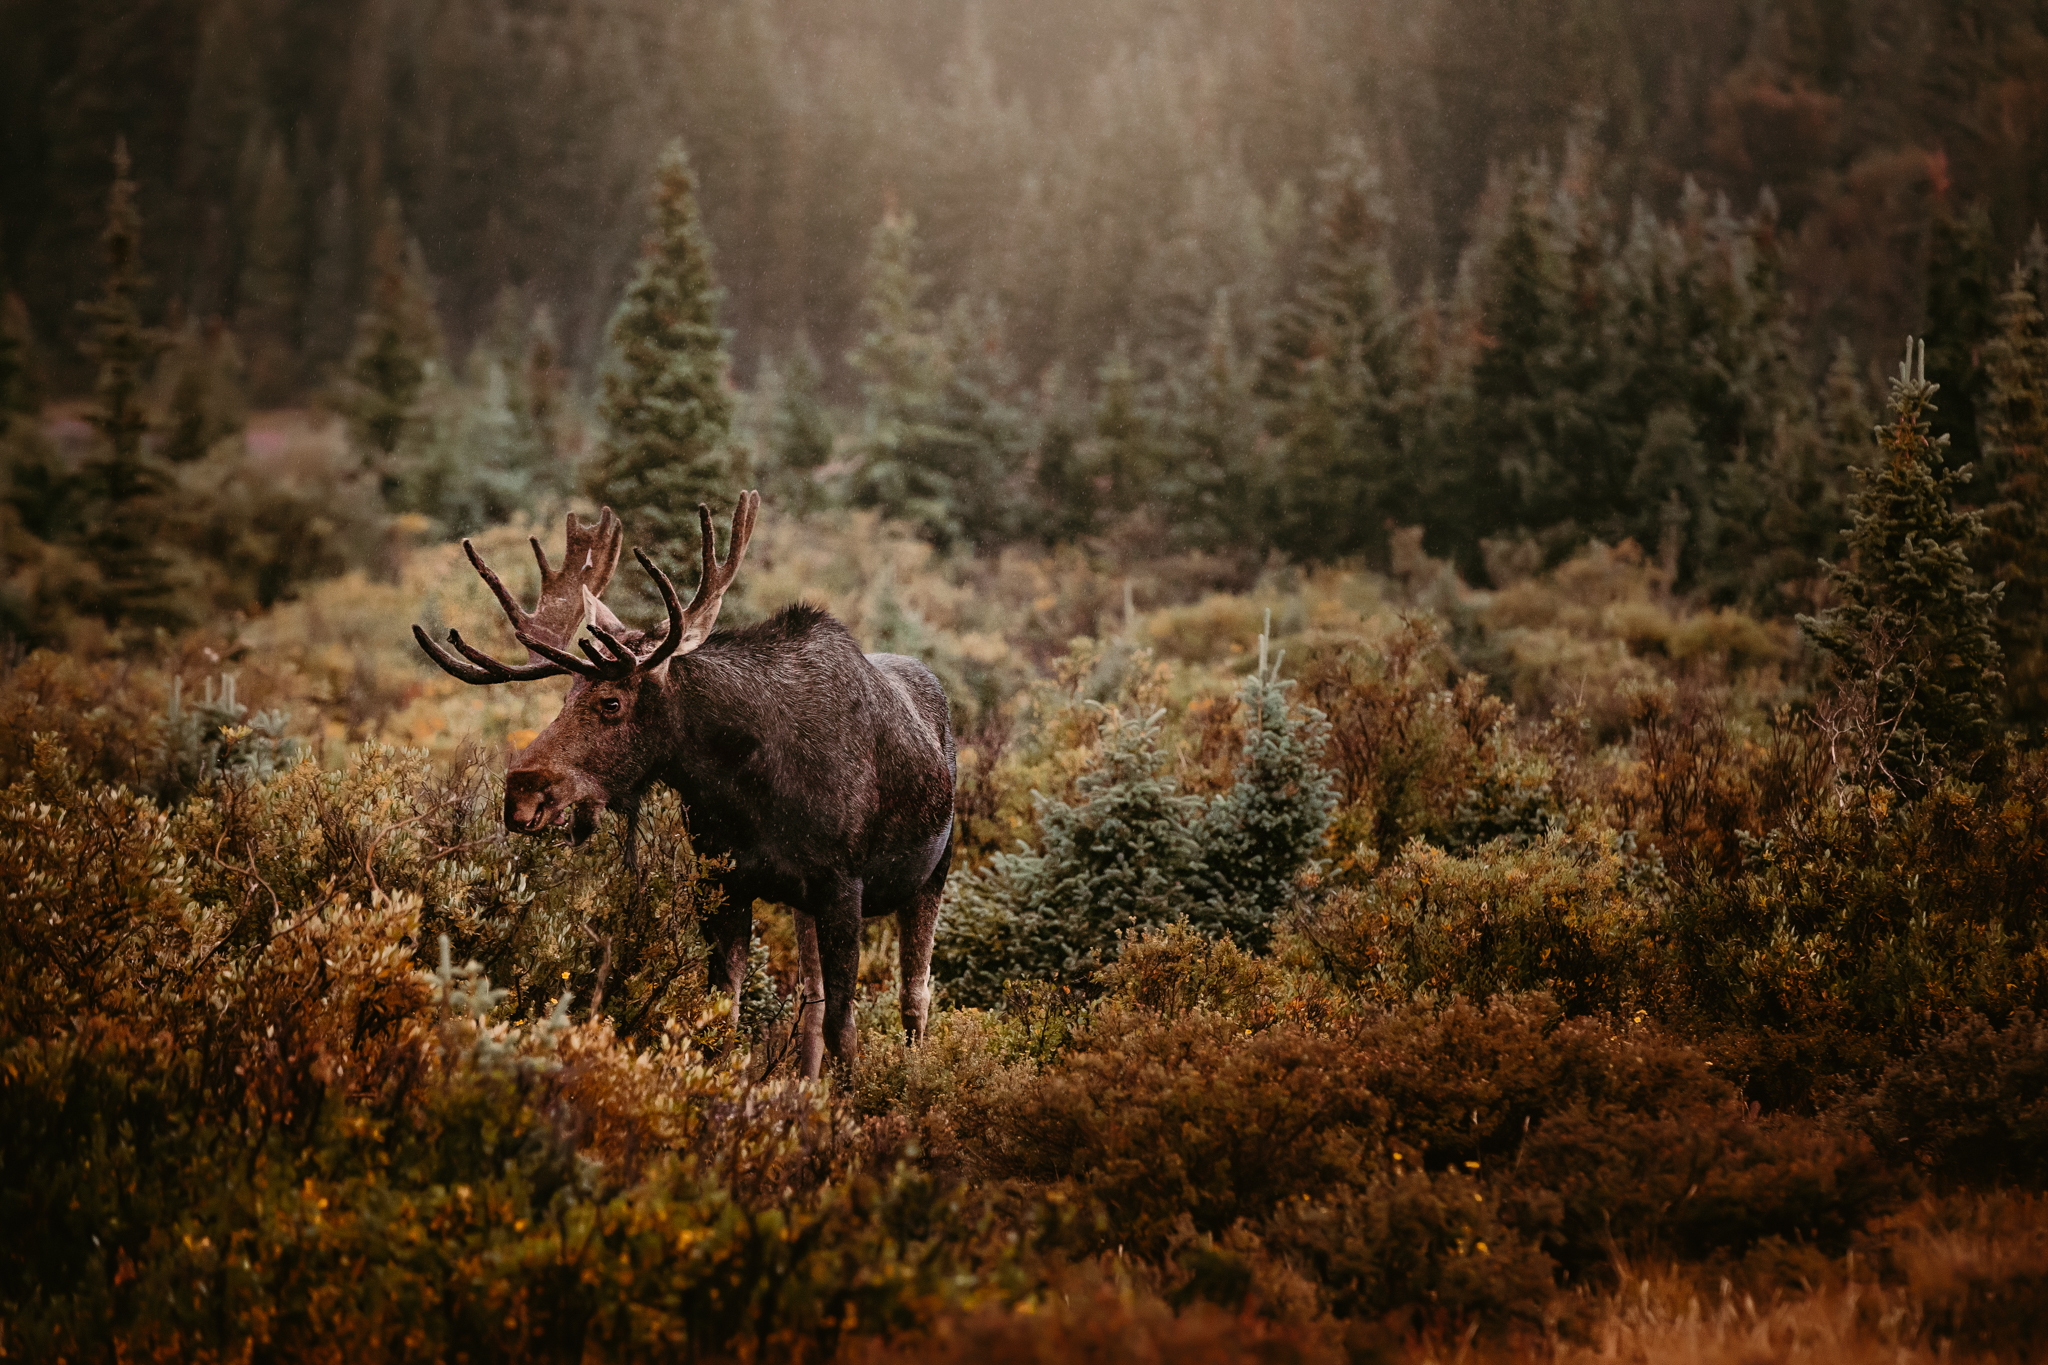 Location Scouting - Moose